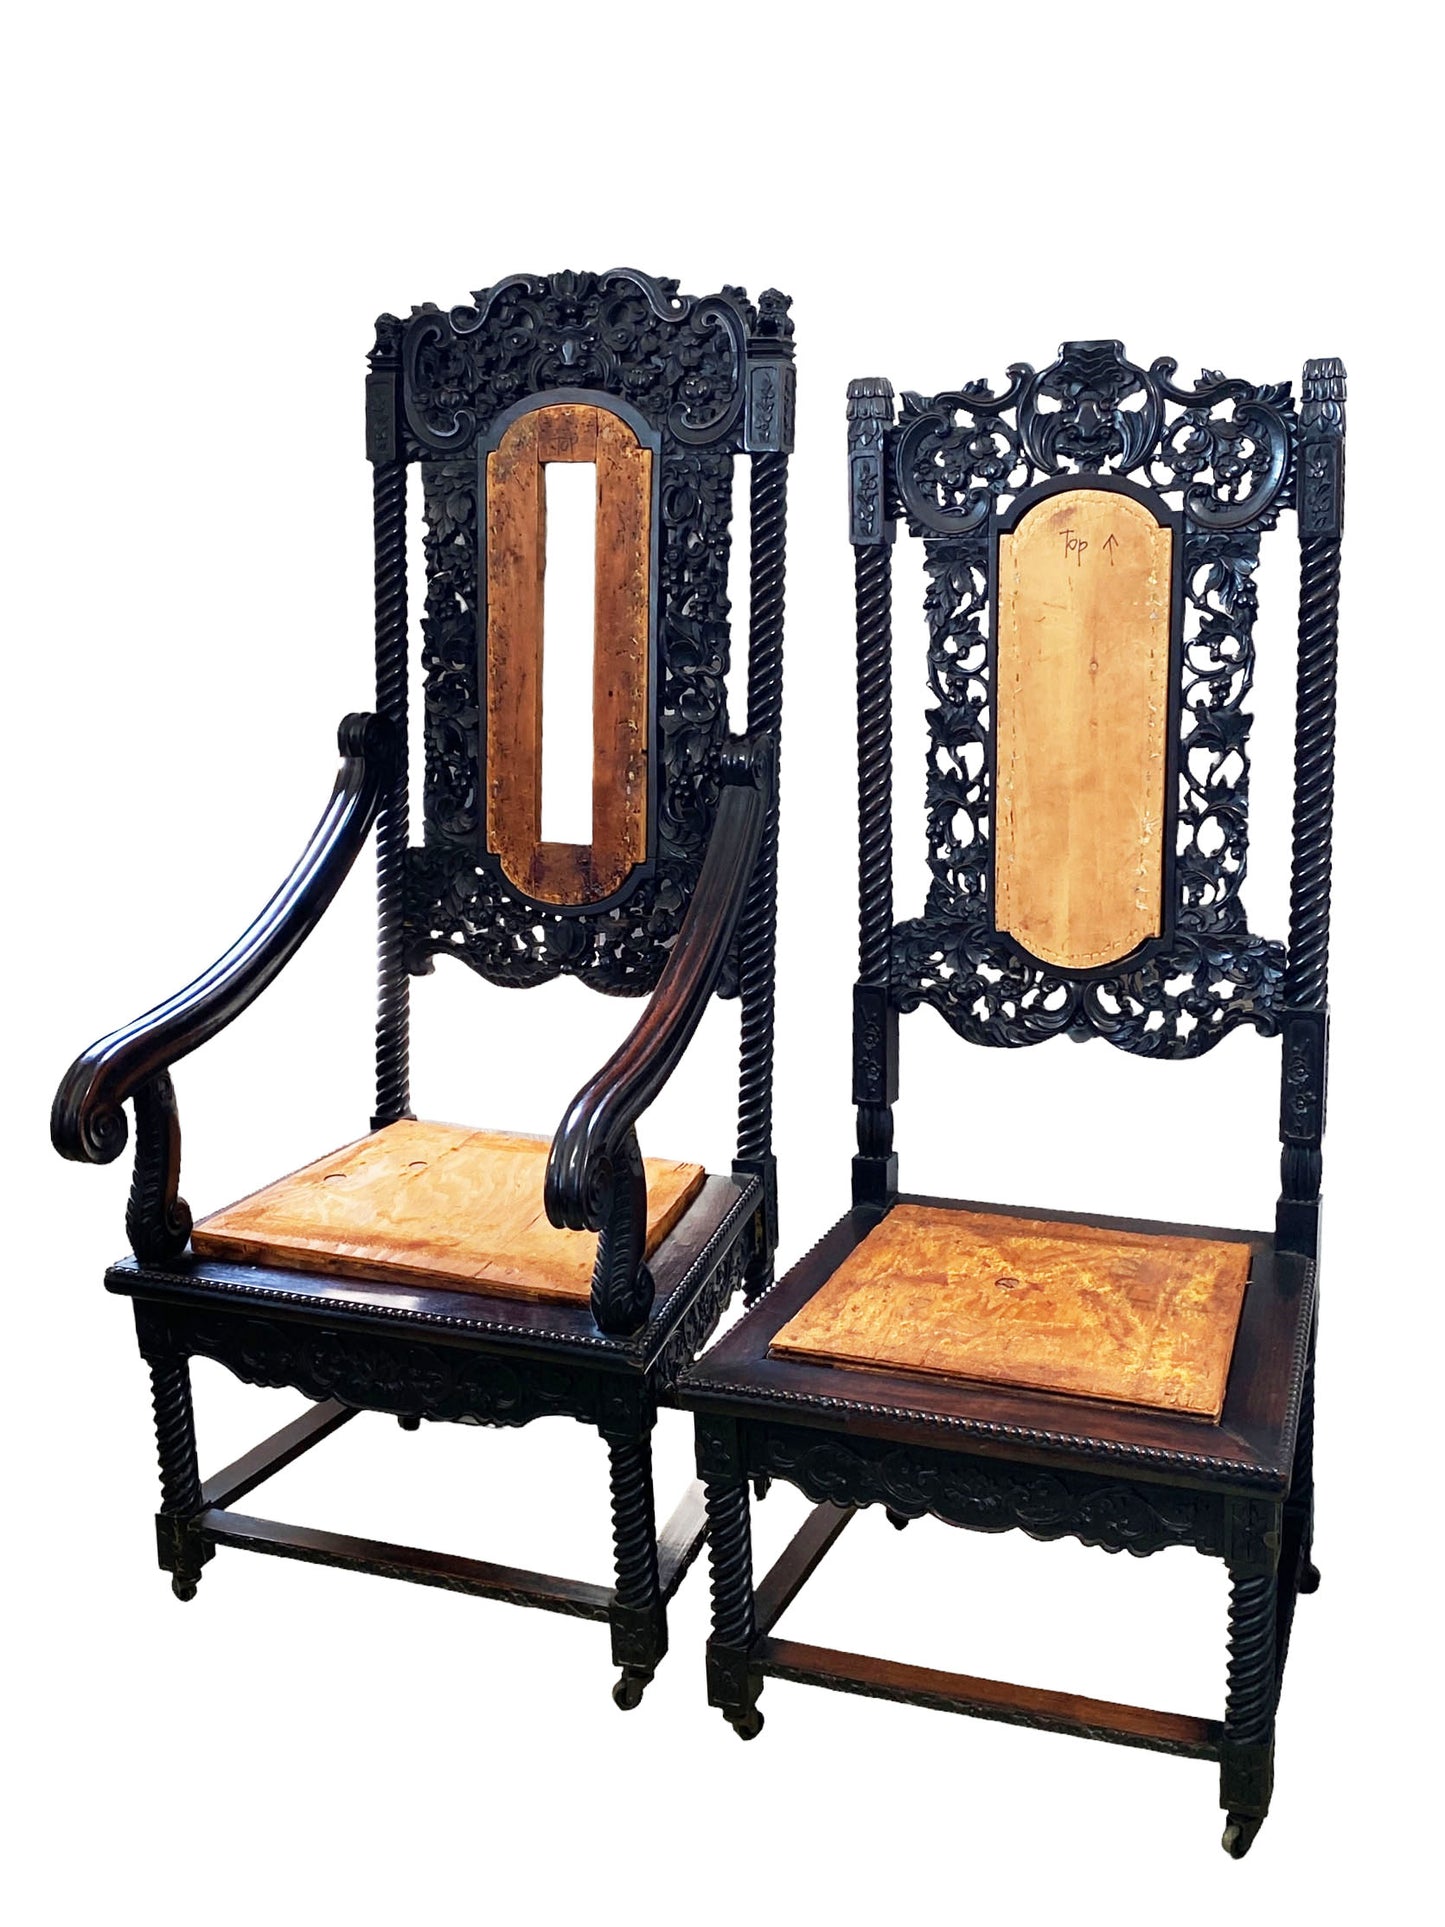 #7058/59 Sino-British Victorian Jacobean Revival Carved ornate Throne Pair of Chairs